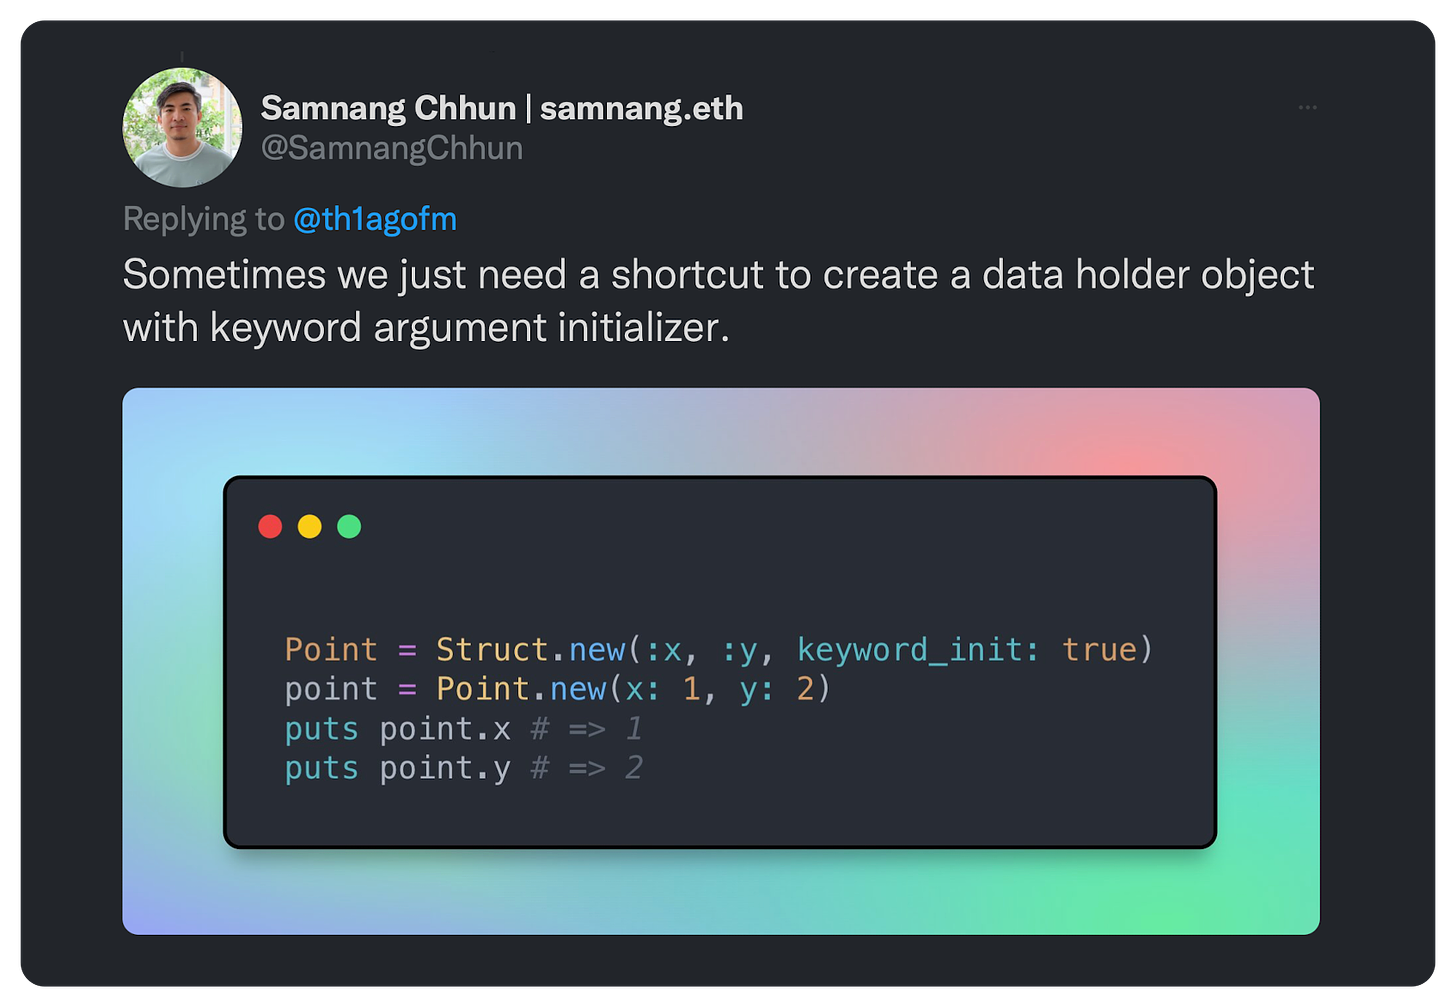 Sometimes we just need a shortcut to create a data holder object with keyword argument initializer.